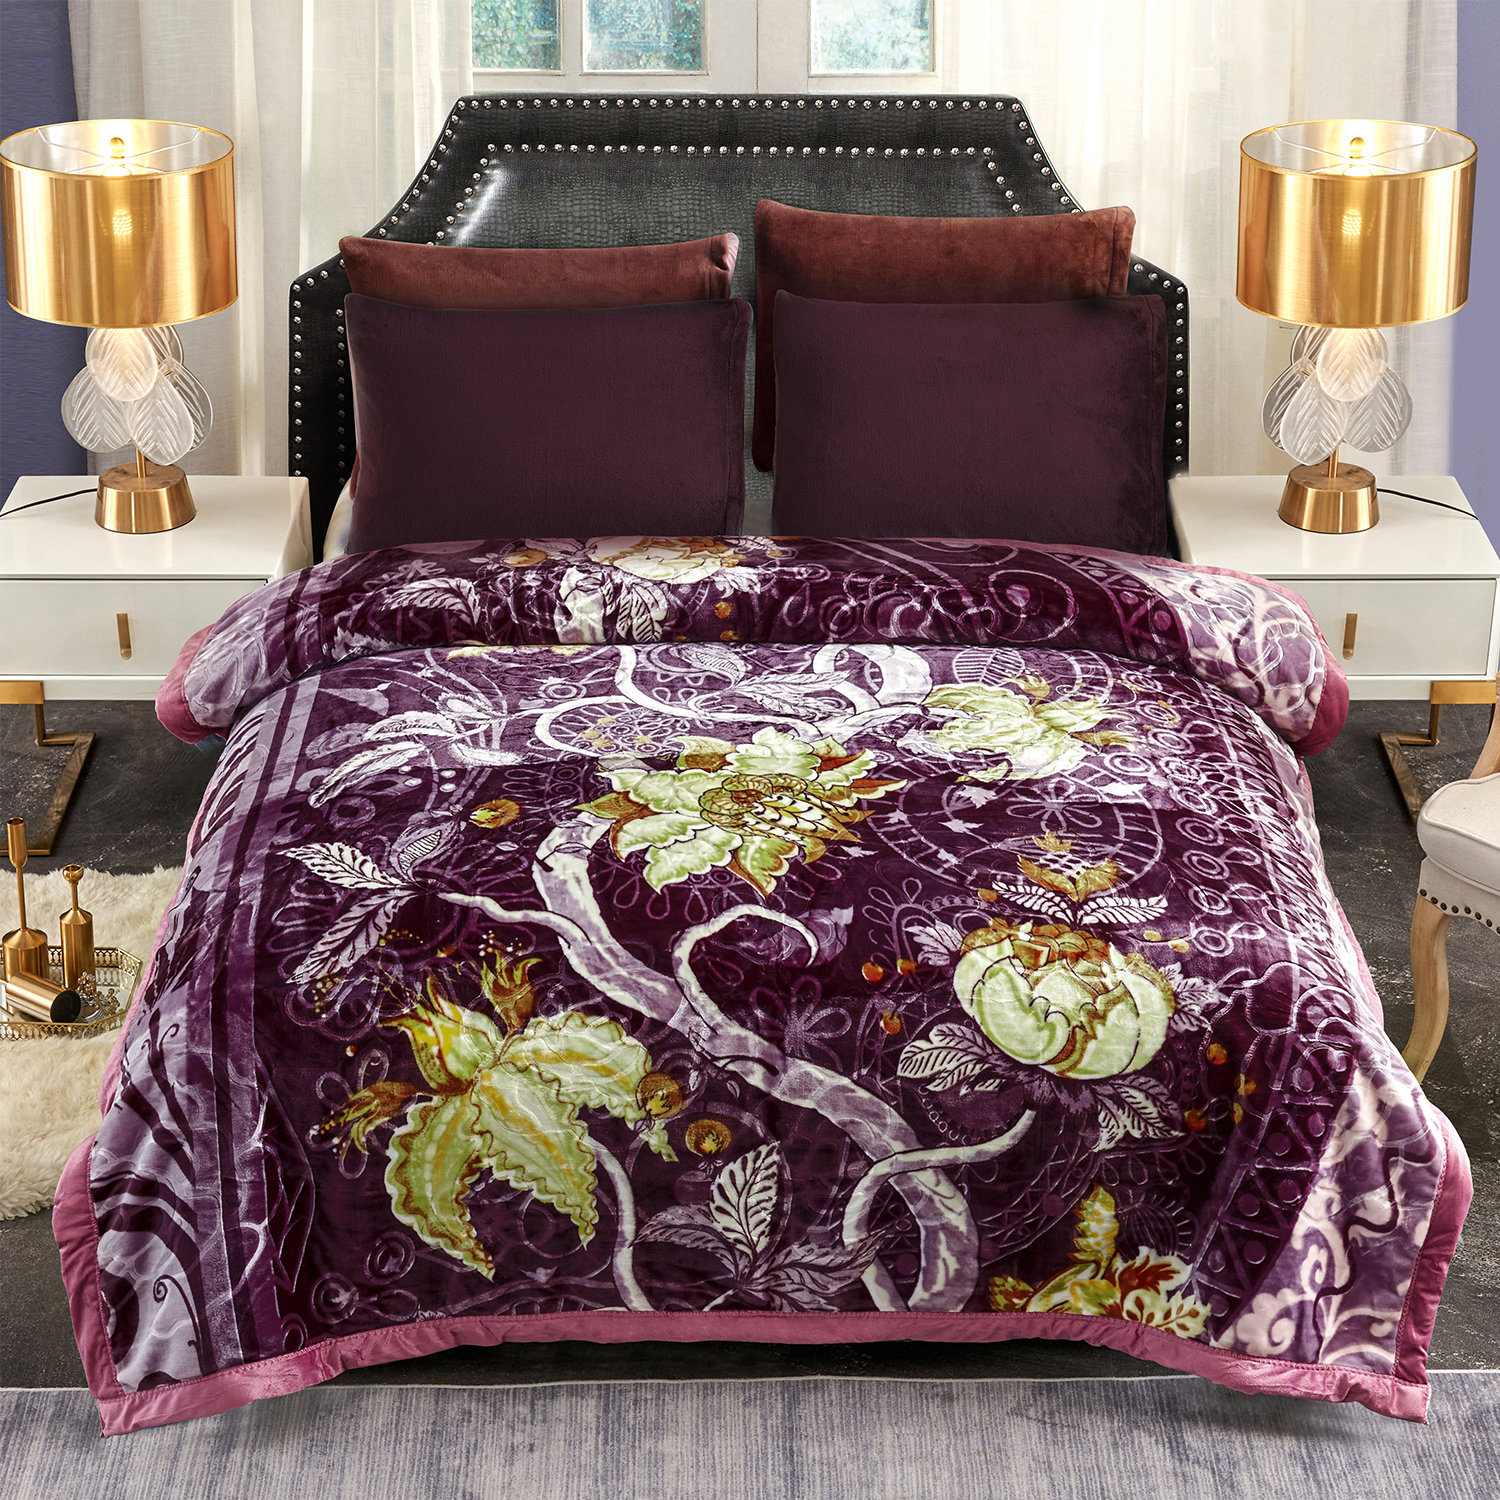 JML Embroidered Blanket & Reviews